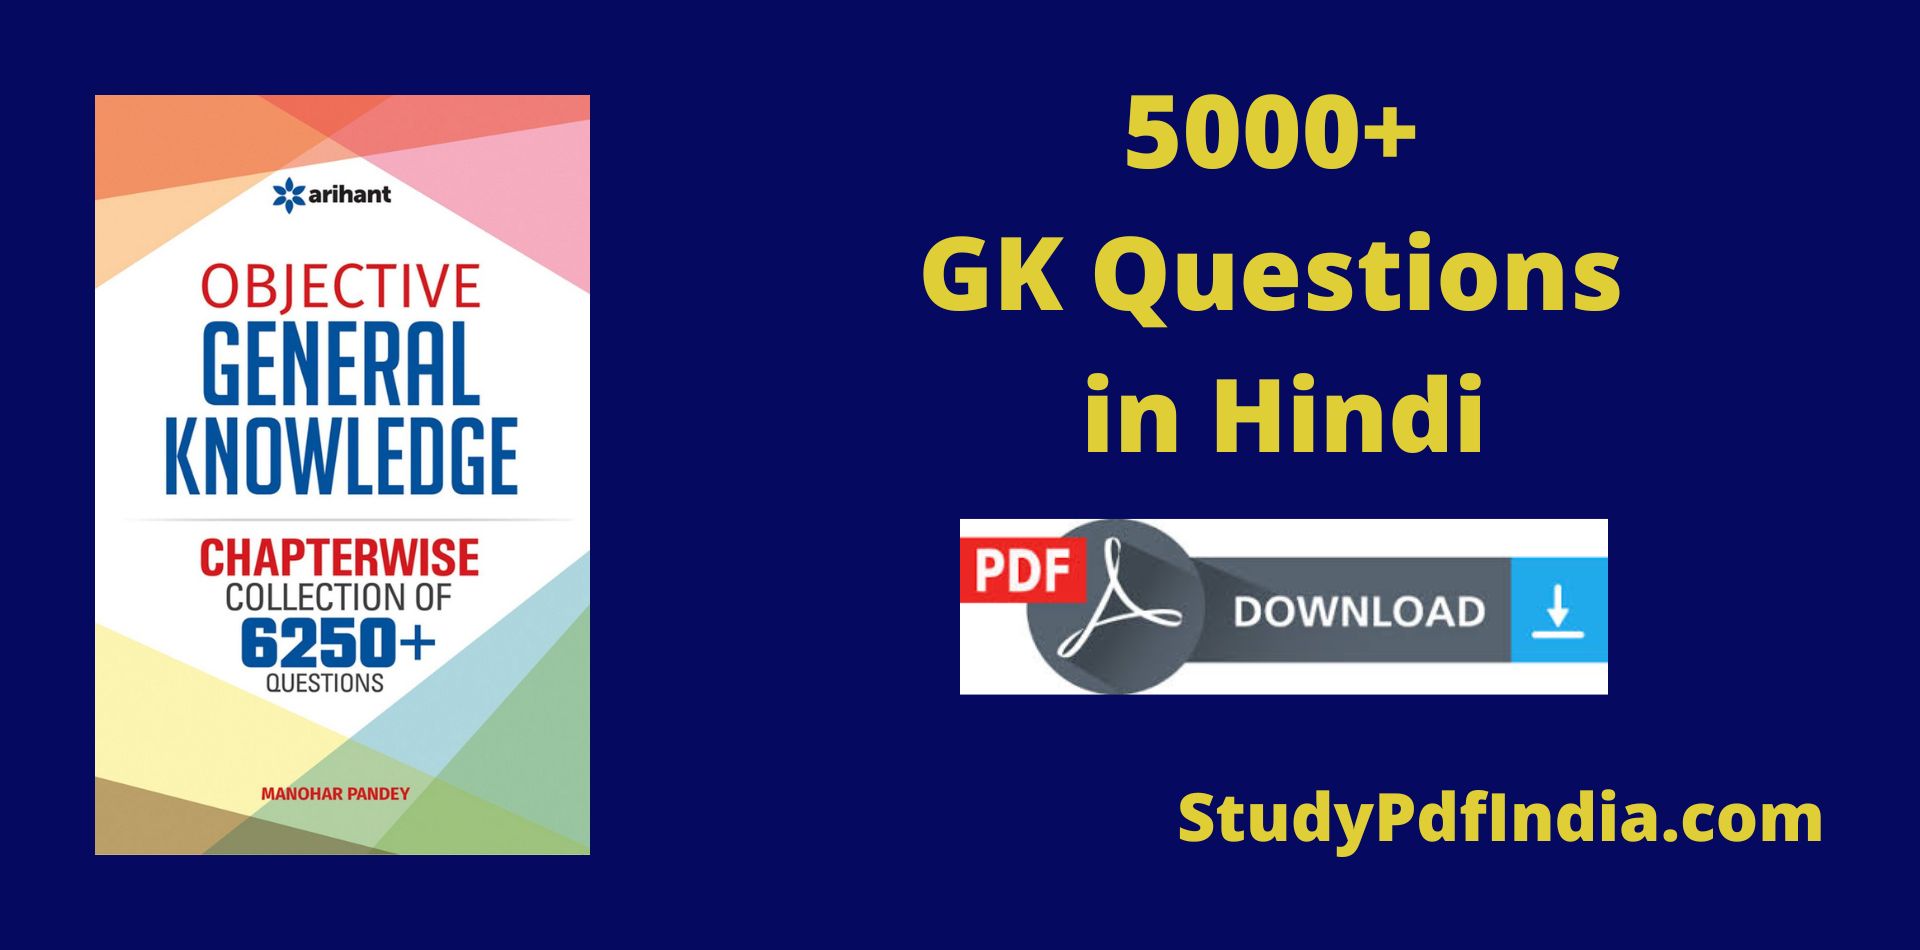 5000+ GK Questions PDF Download in Hindi